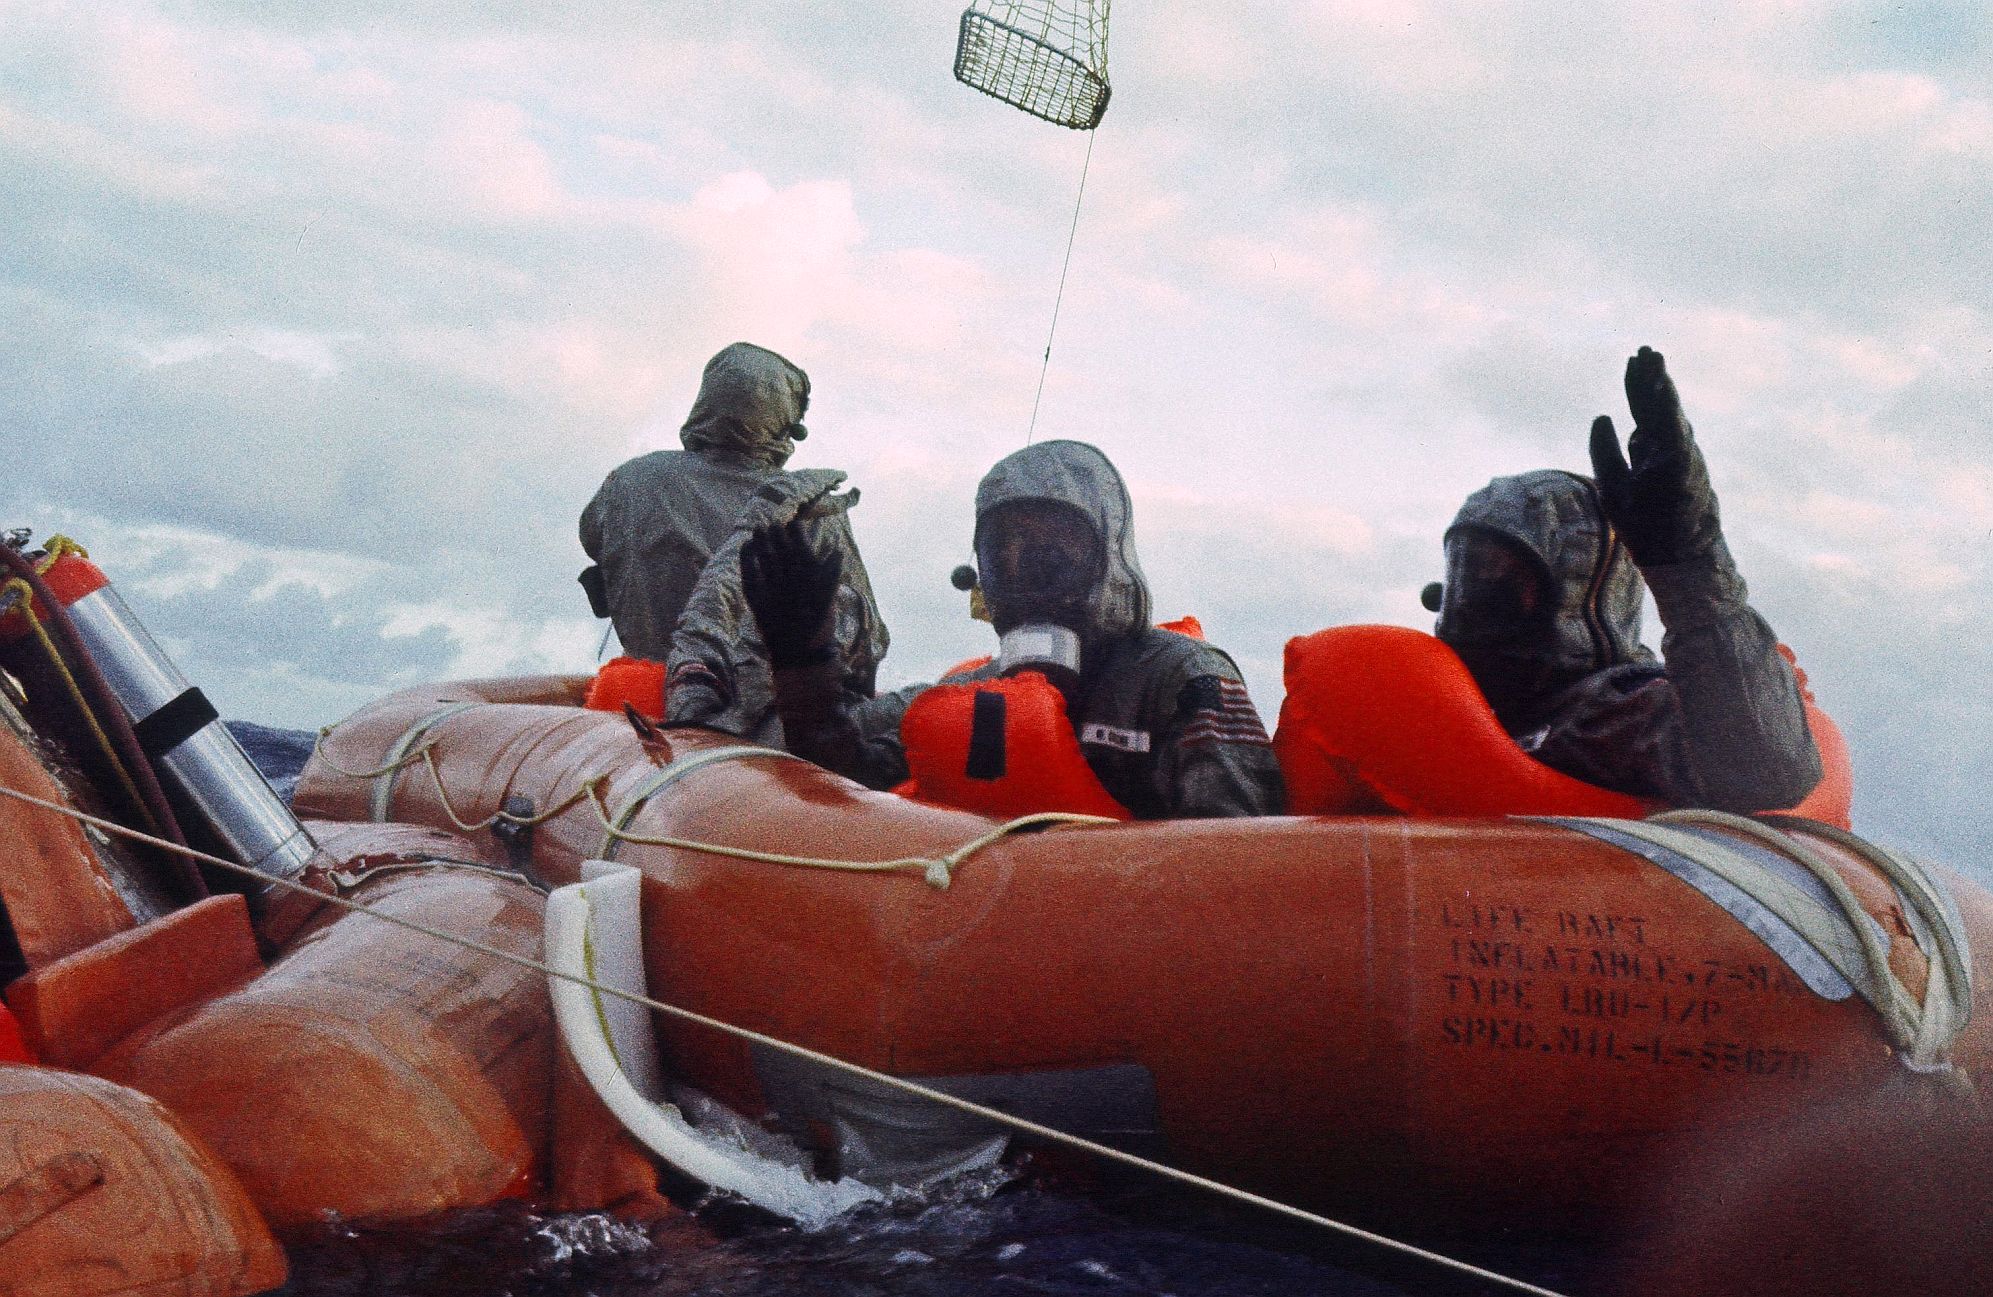 Taken by U.S. Navy UDT swimmer Mike Mallory in a nearby raft, Hatleberg prepares to capture the Billy Pugh net for Neil, while Buss and Mike wave to Mallory